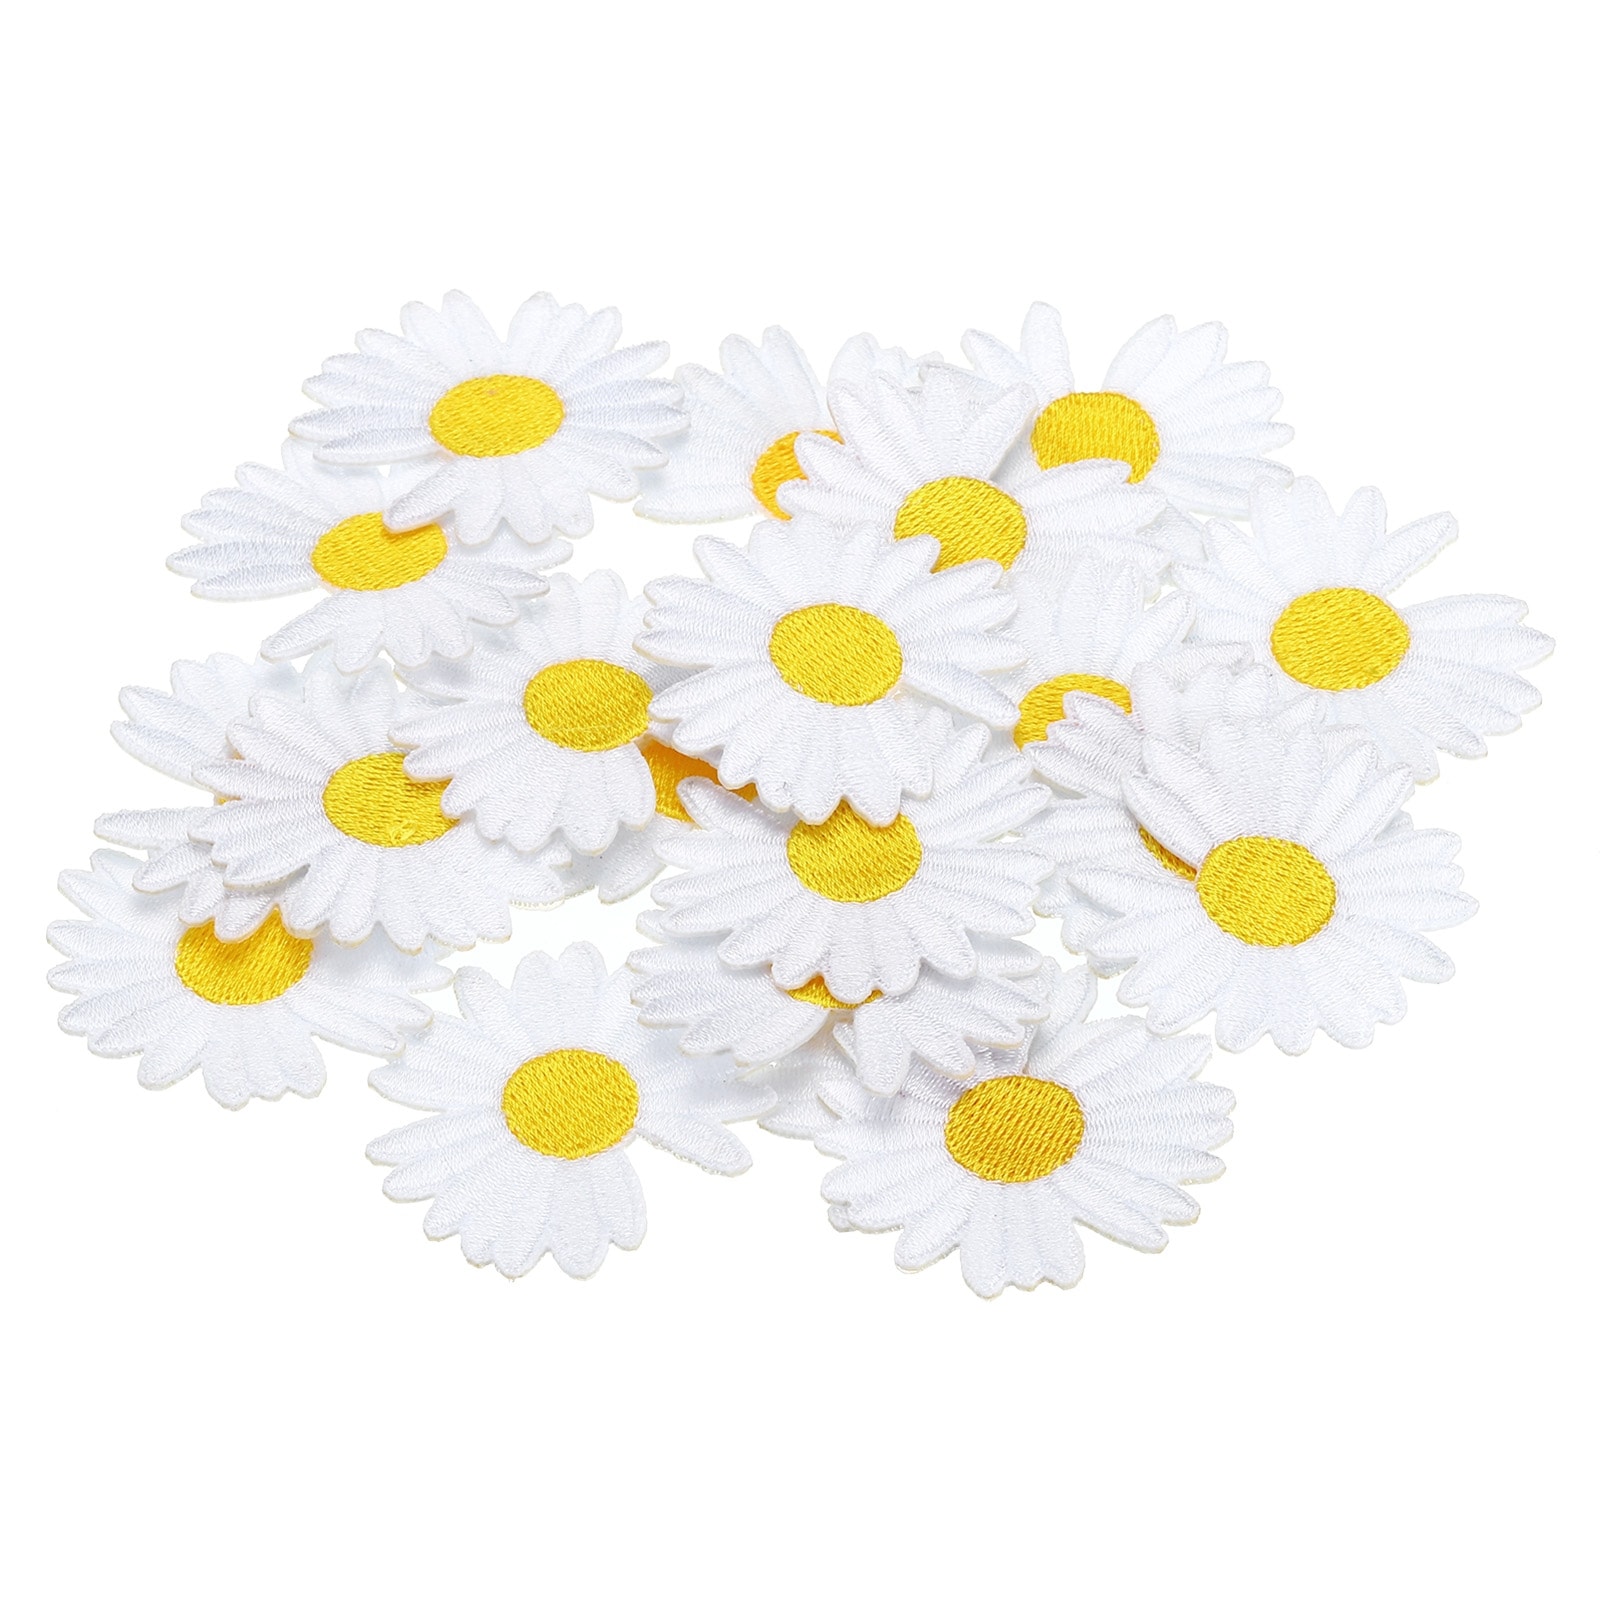 Iron on Patches for Clothes, 30 Pack Flower Patch Hot Melt Adhesive, White